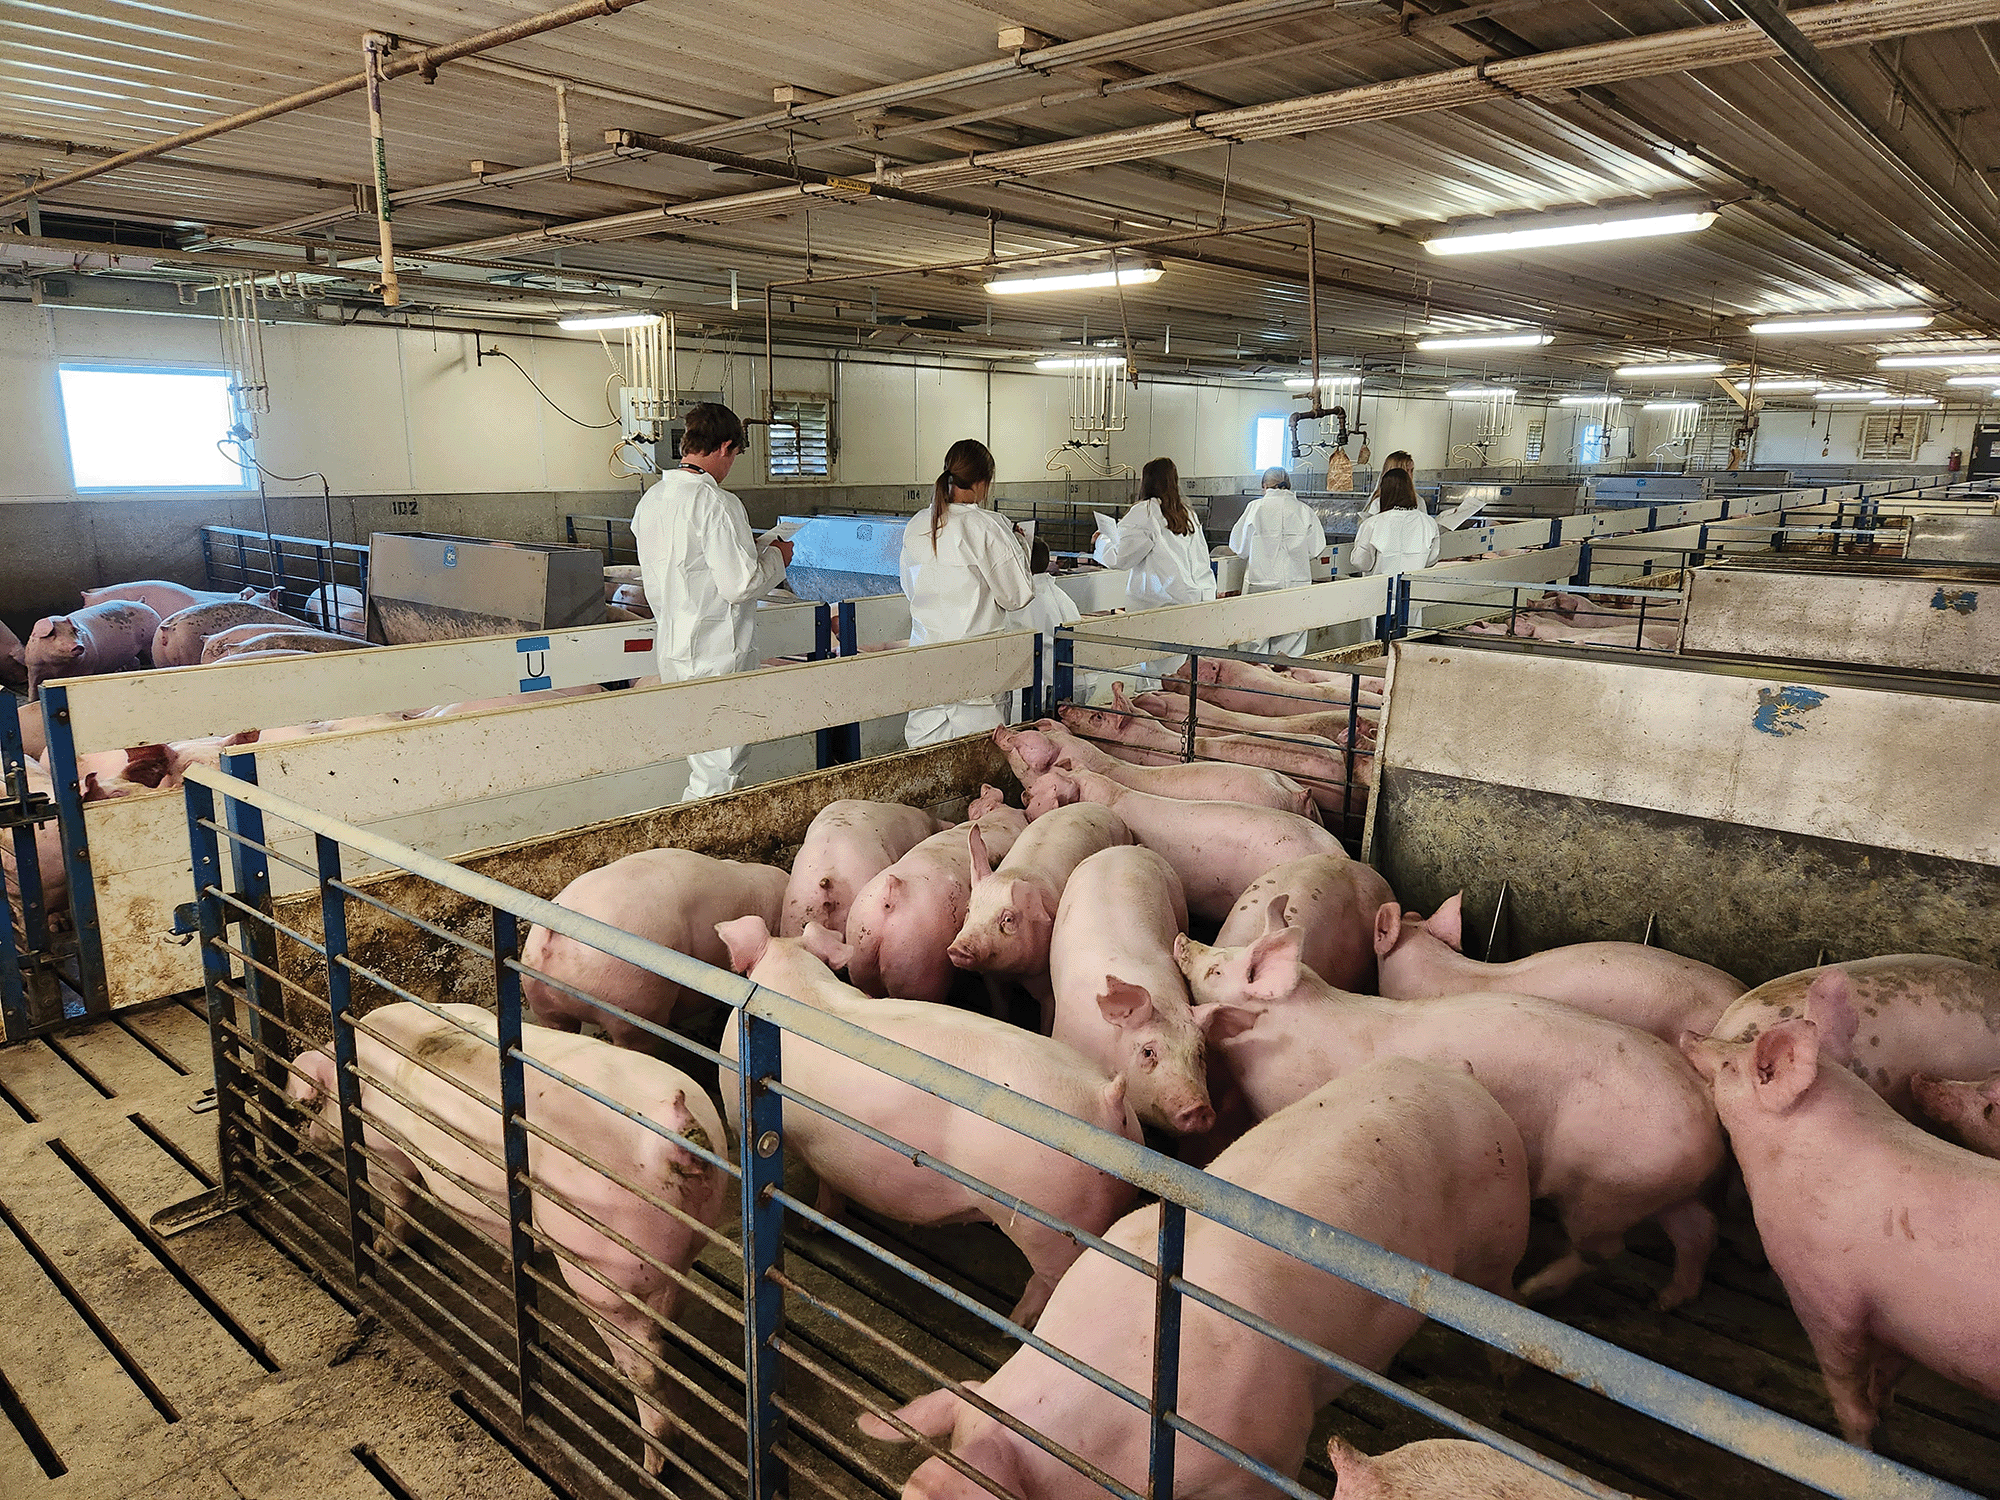 Youth inspecting swine in pens